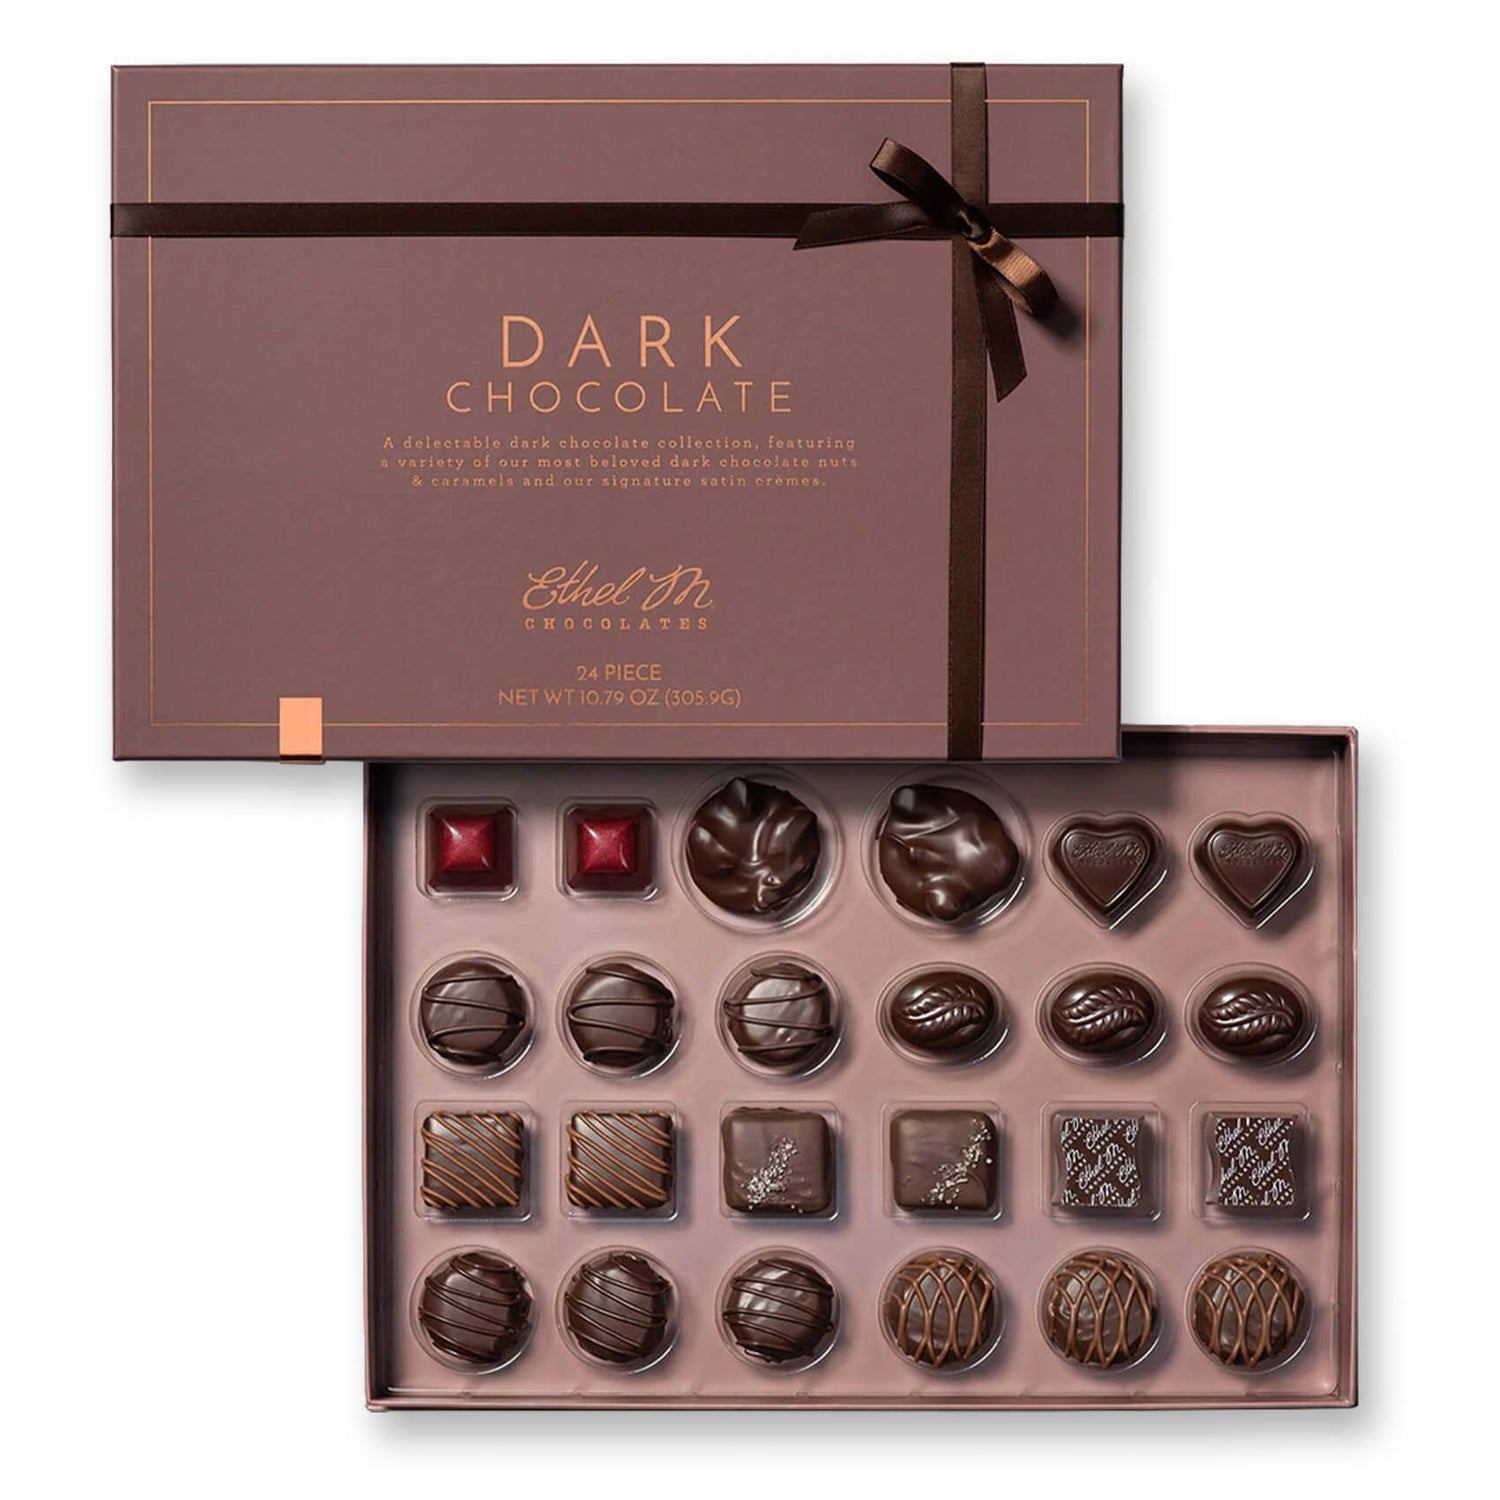 Delight on this 24 Piece Ethel M Chocolates Ultimate Assortment of the Finest Dark Chocolate coverings and Gourmet Fillings.